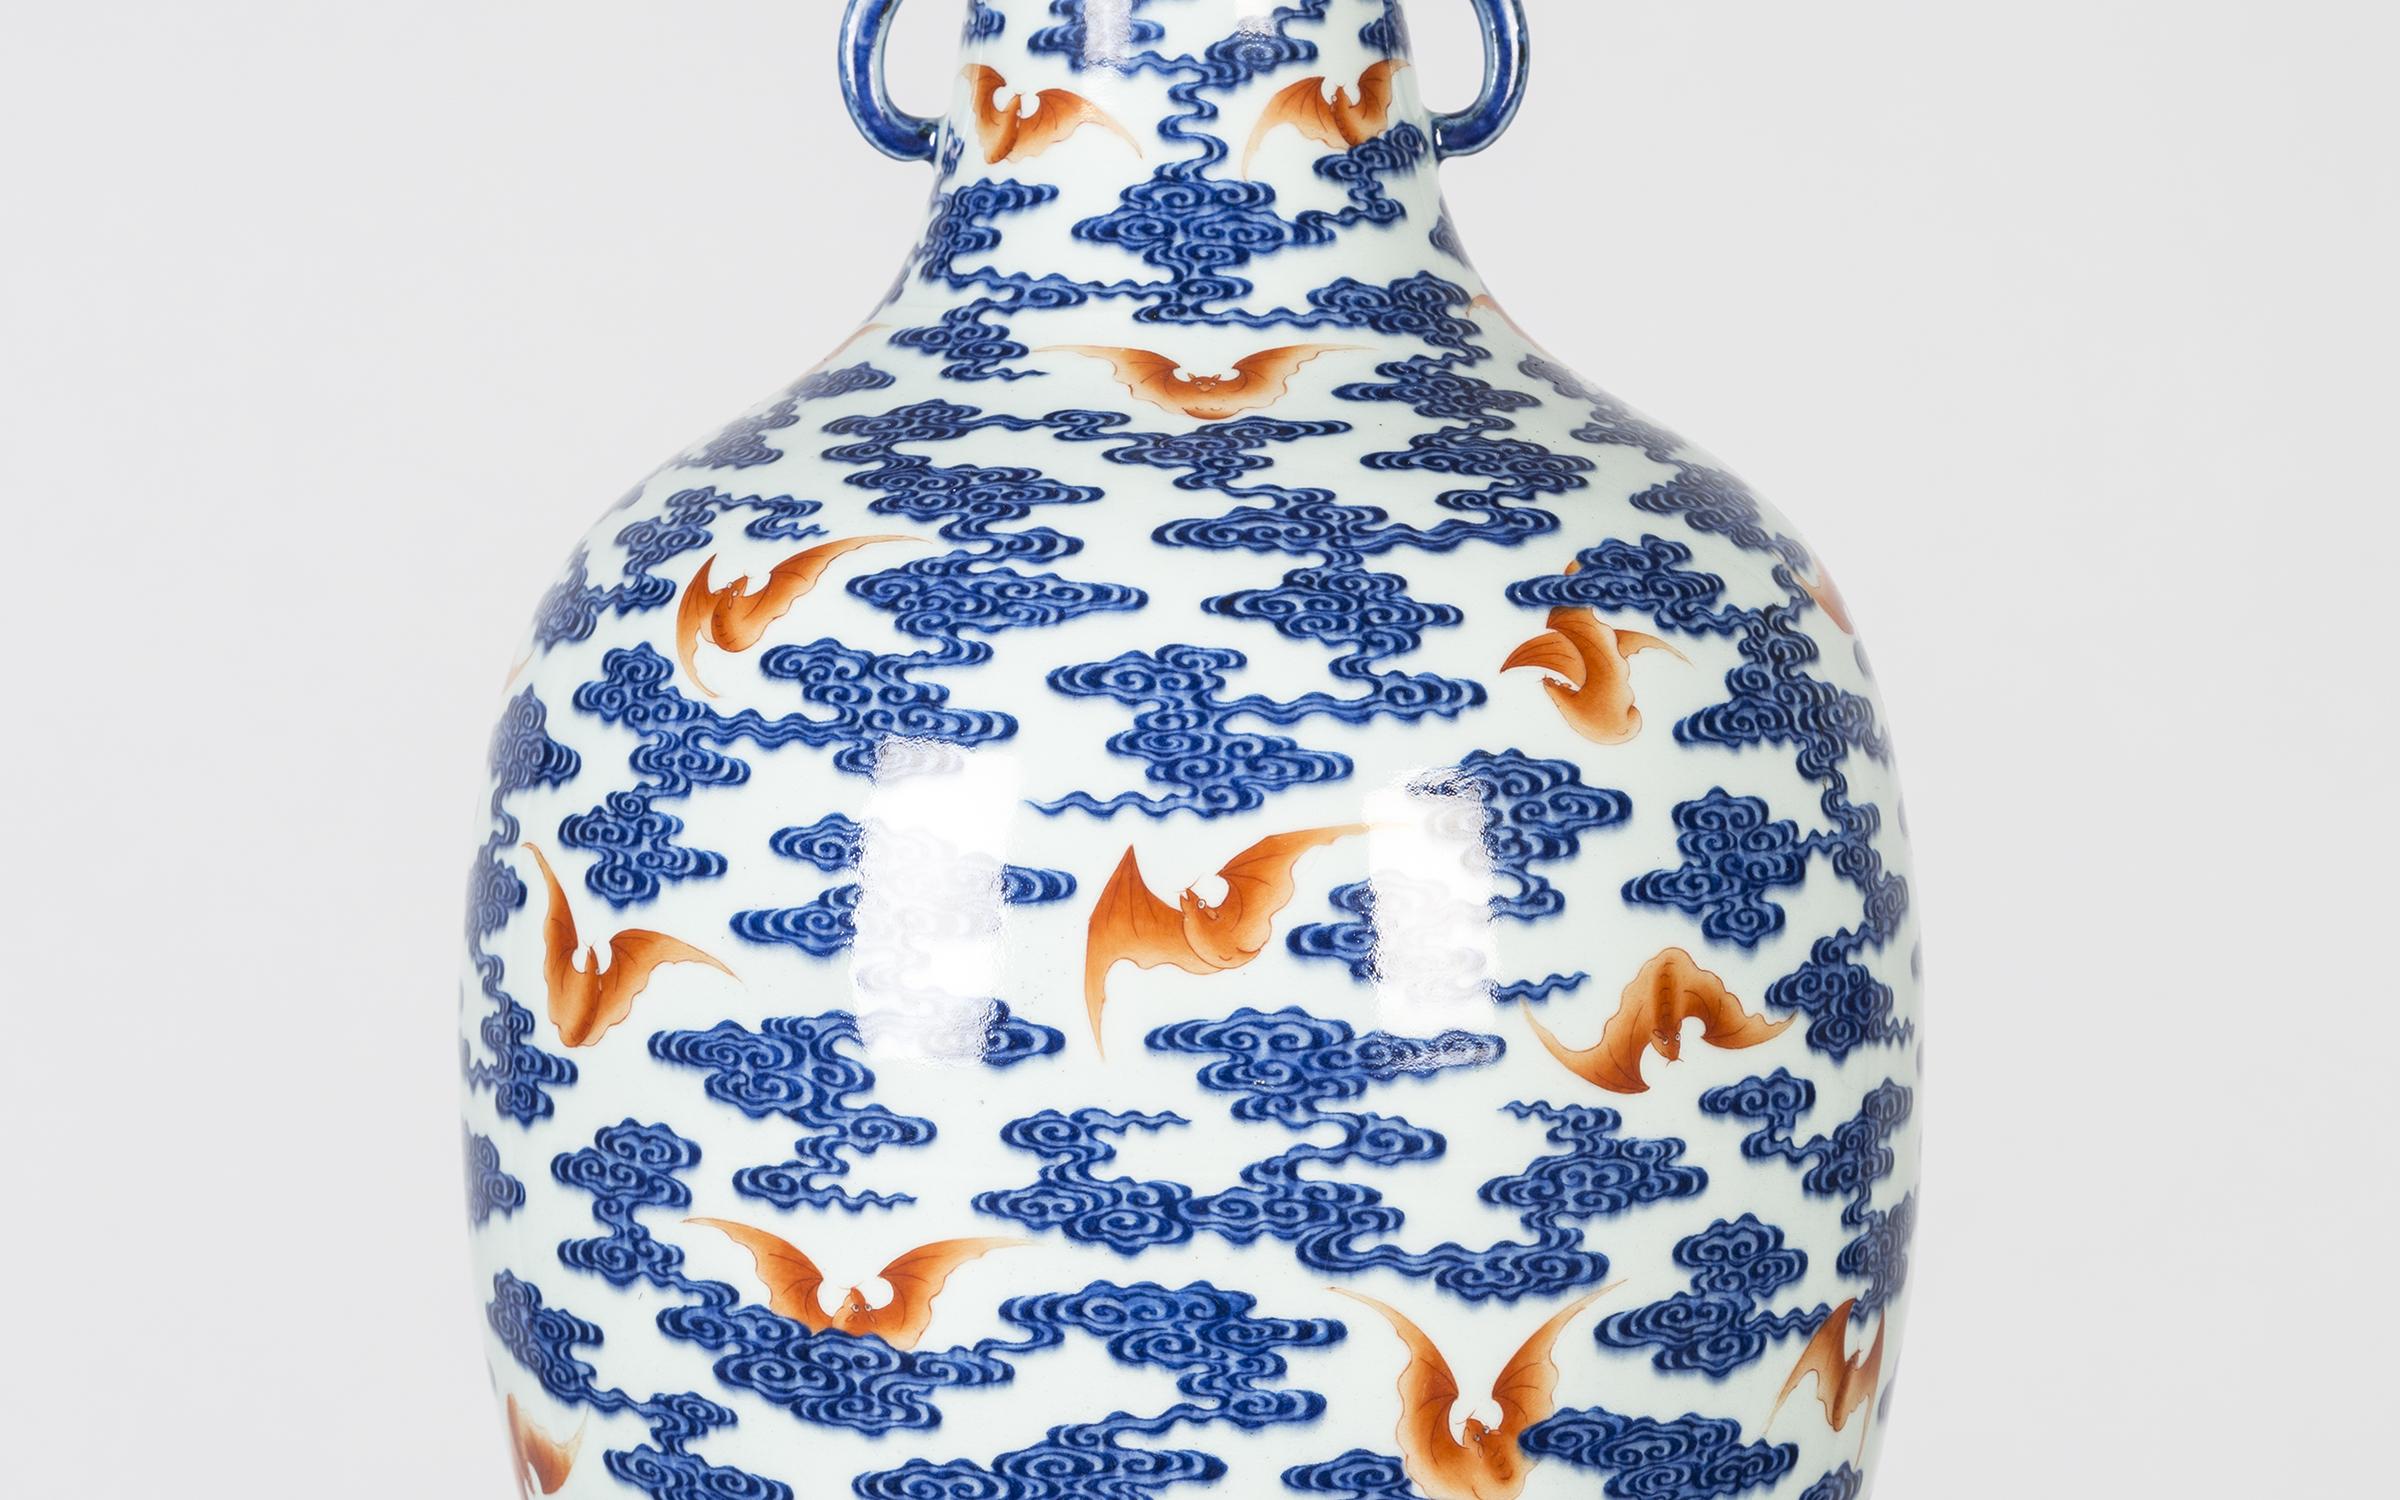 A white and blue vase with orange bats